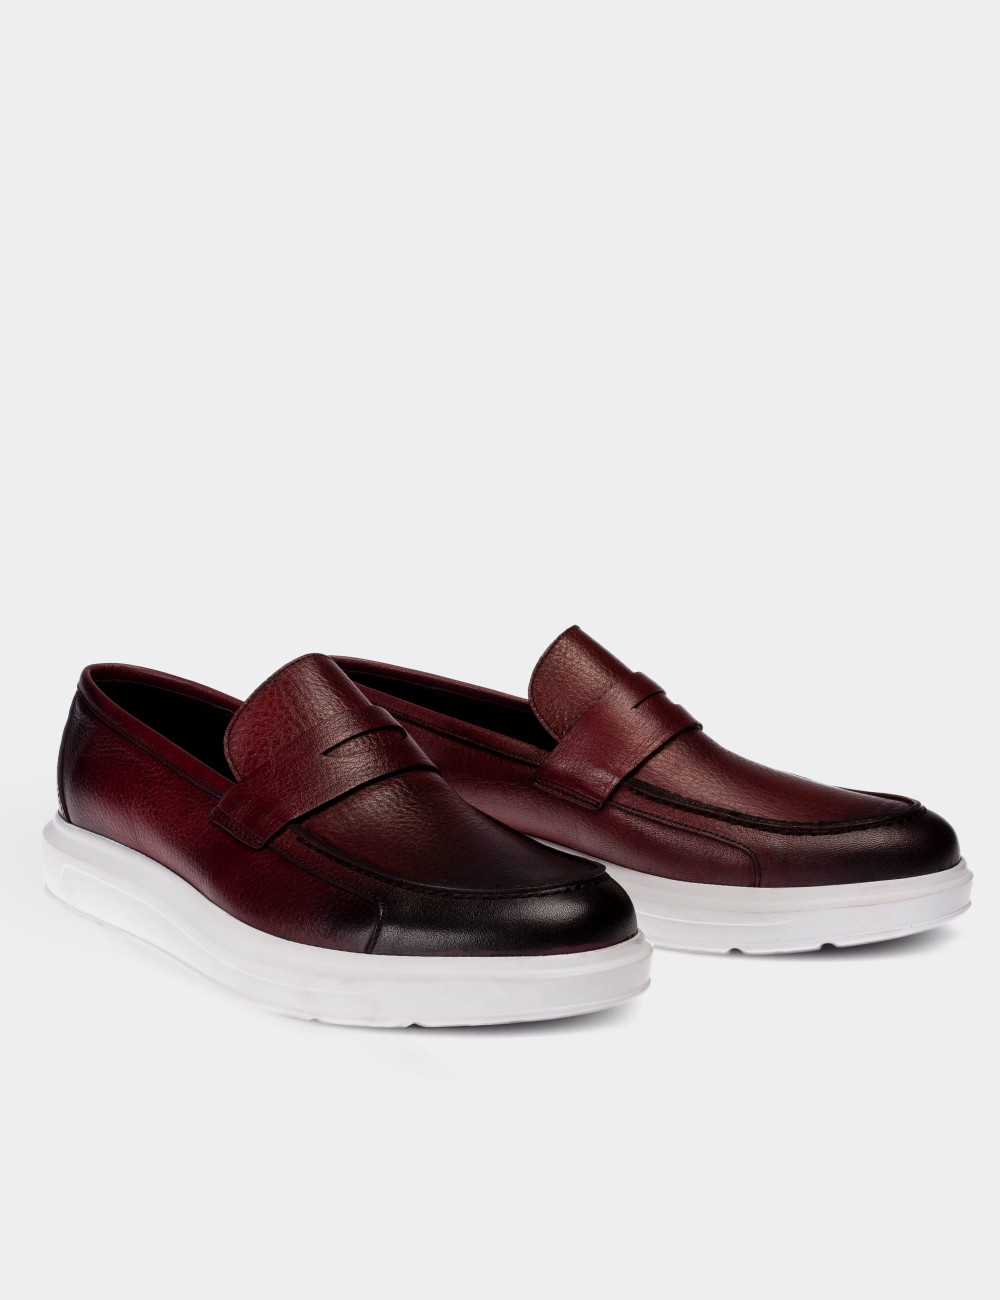 Burgundy  Leather Loafers - 01564MBRDP10